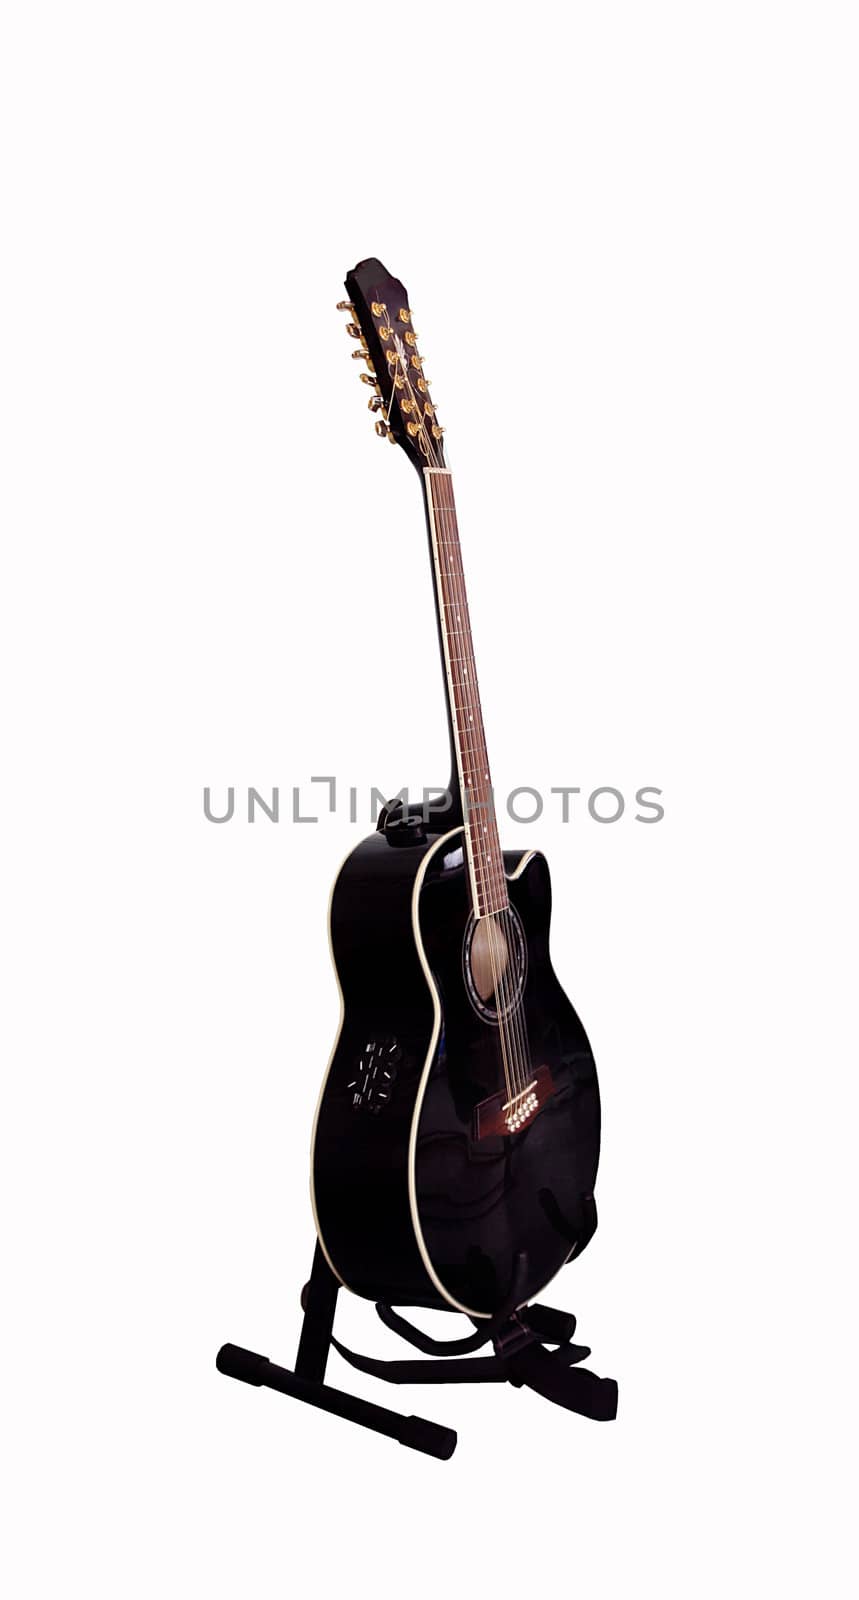 Black guitar on a stand on the white background
